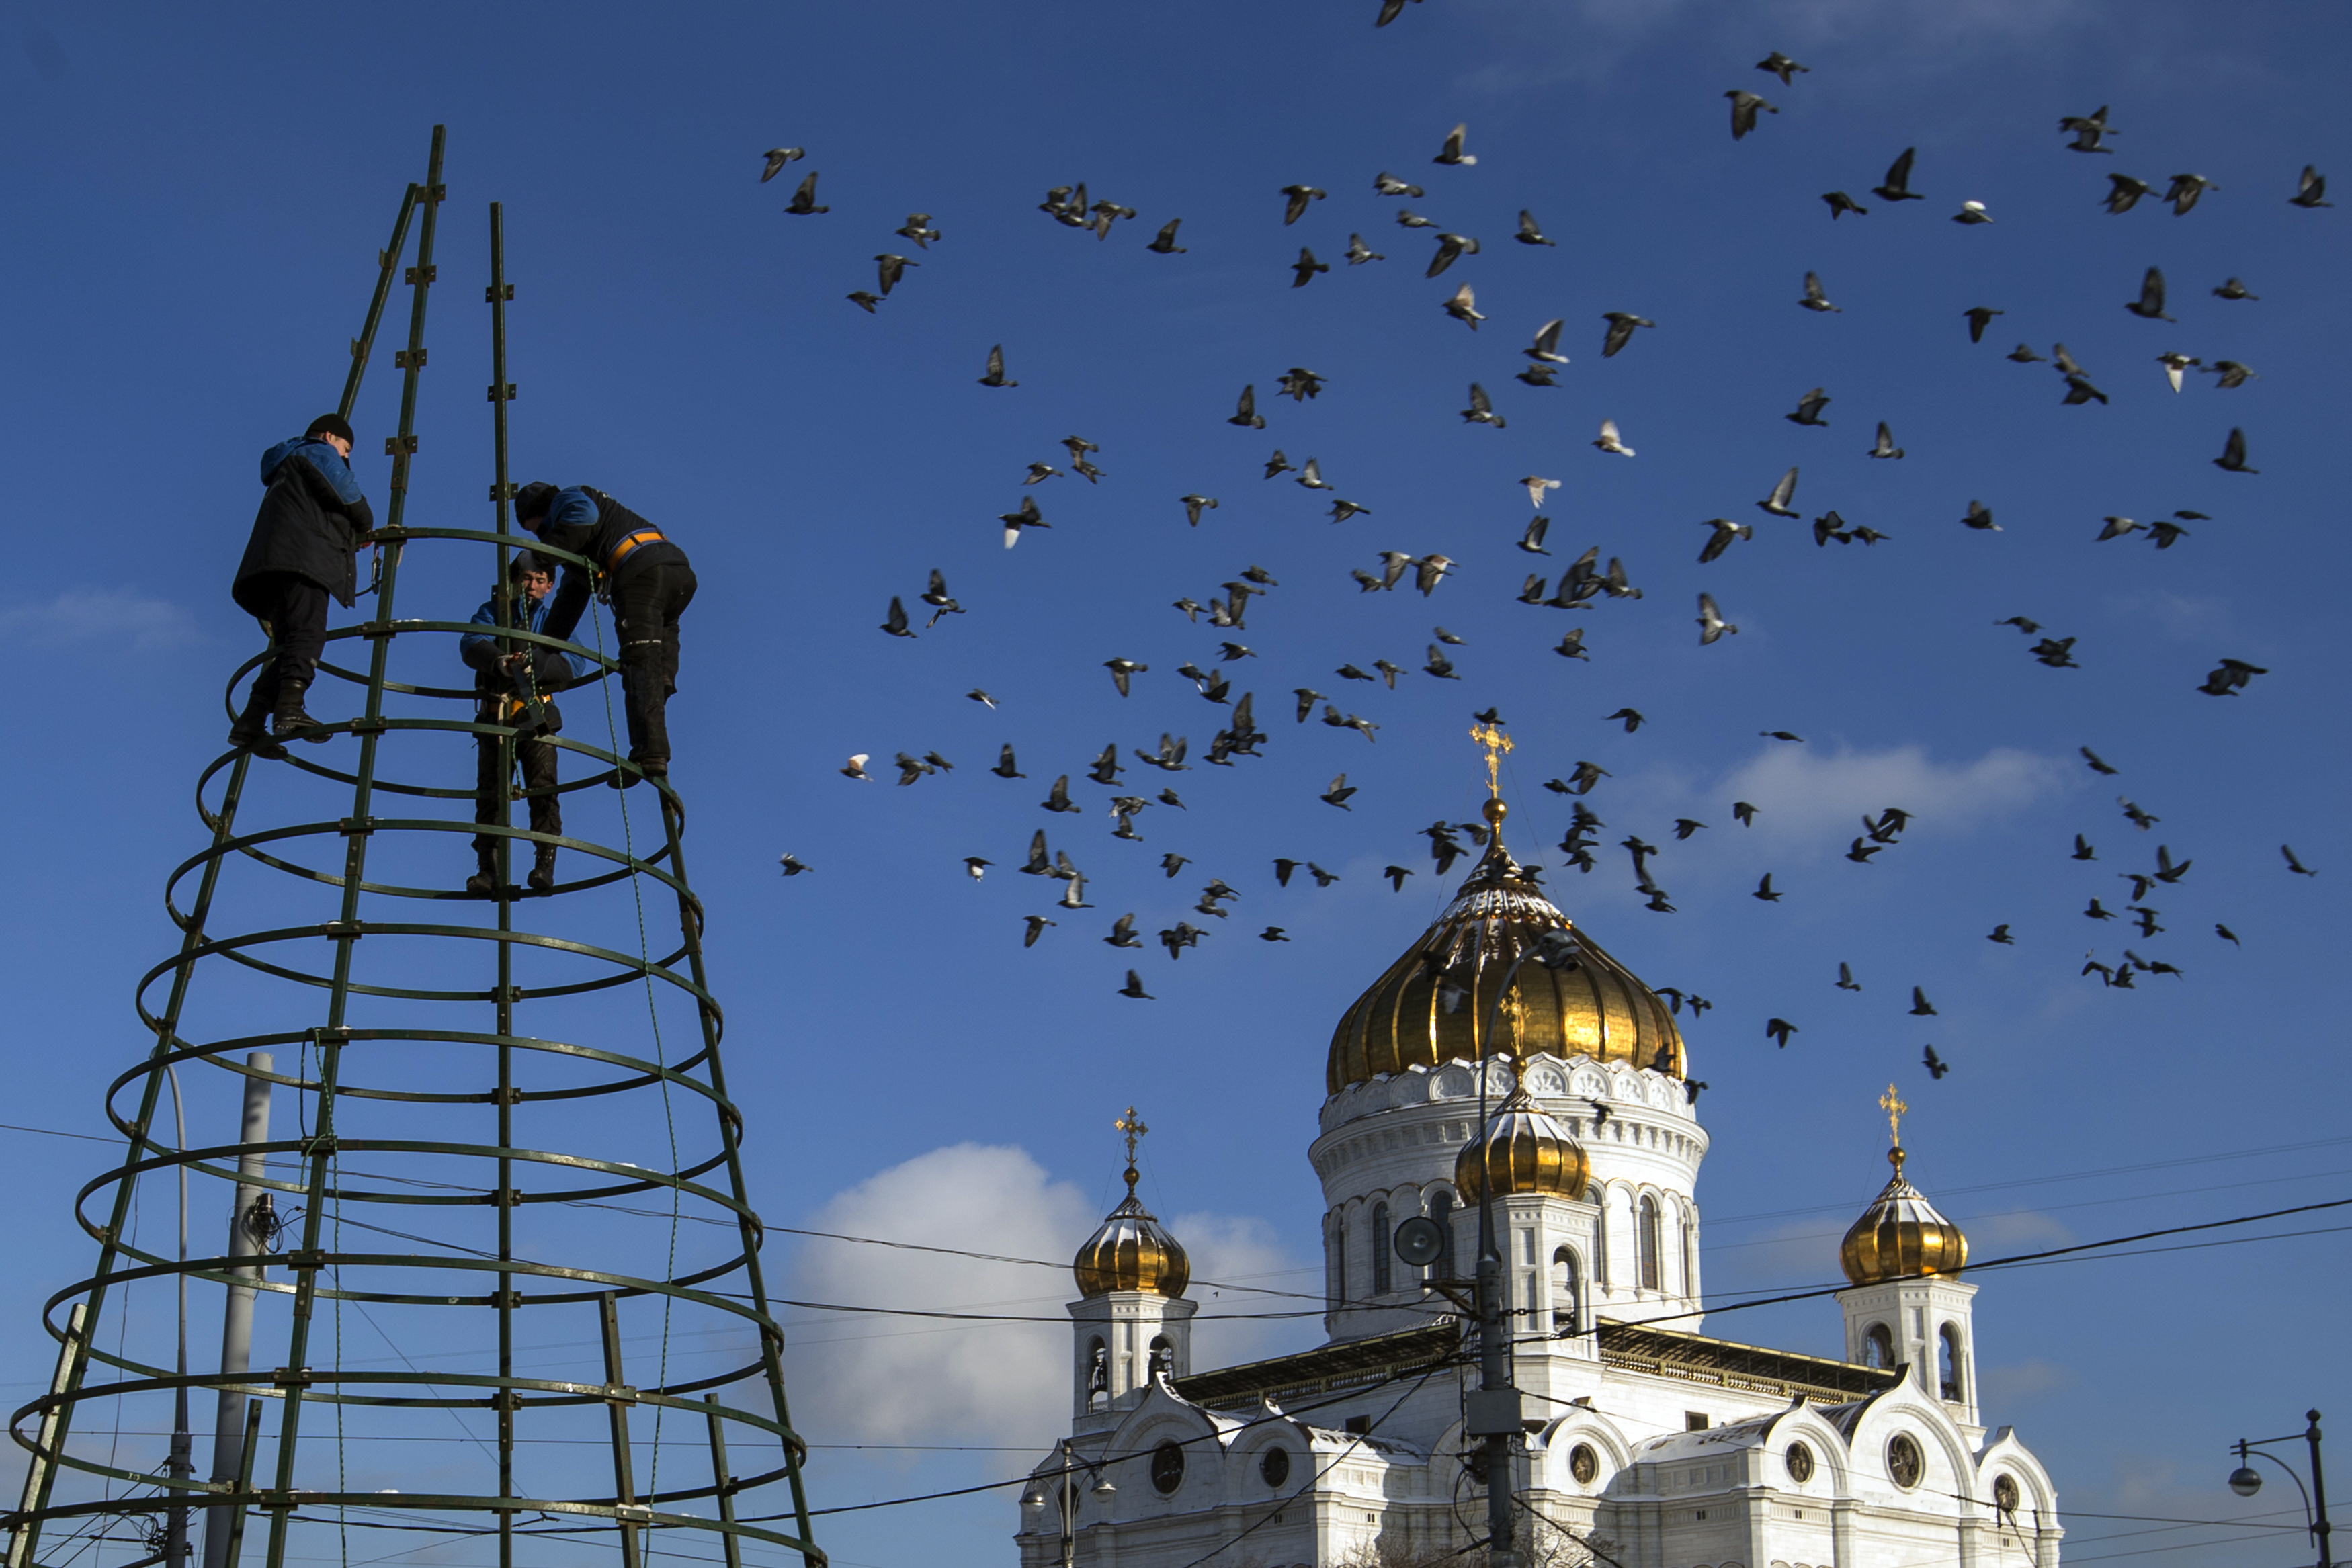 Municipal workers disassemble Christmas decorations in front of Christ the Savior Cathedral in Moscow, Thursday, Jan. 21, 2016. (AP Photo/Pavel Golovkin)